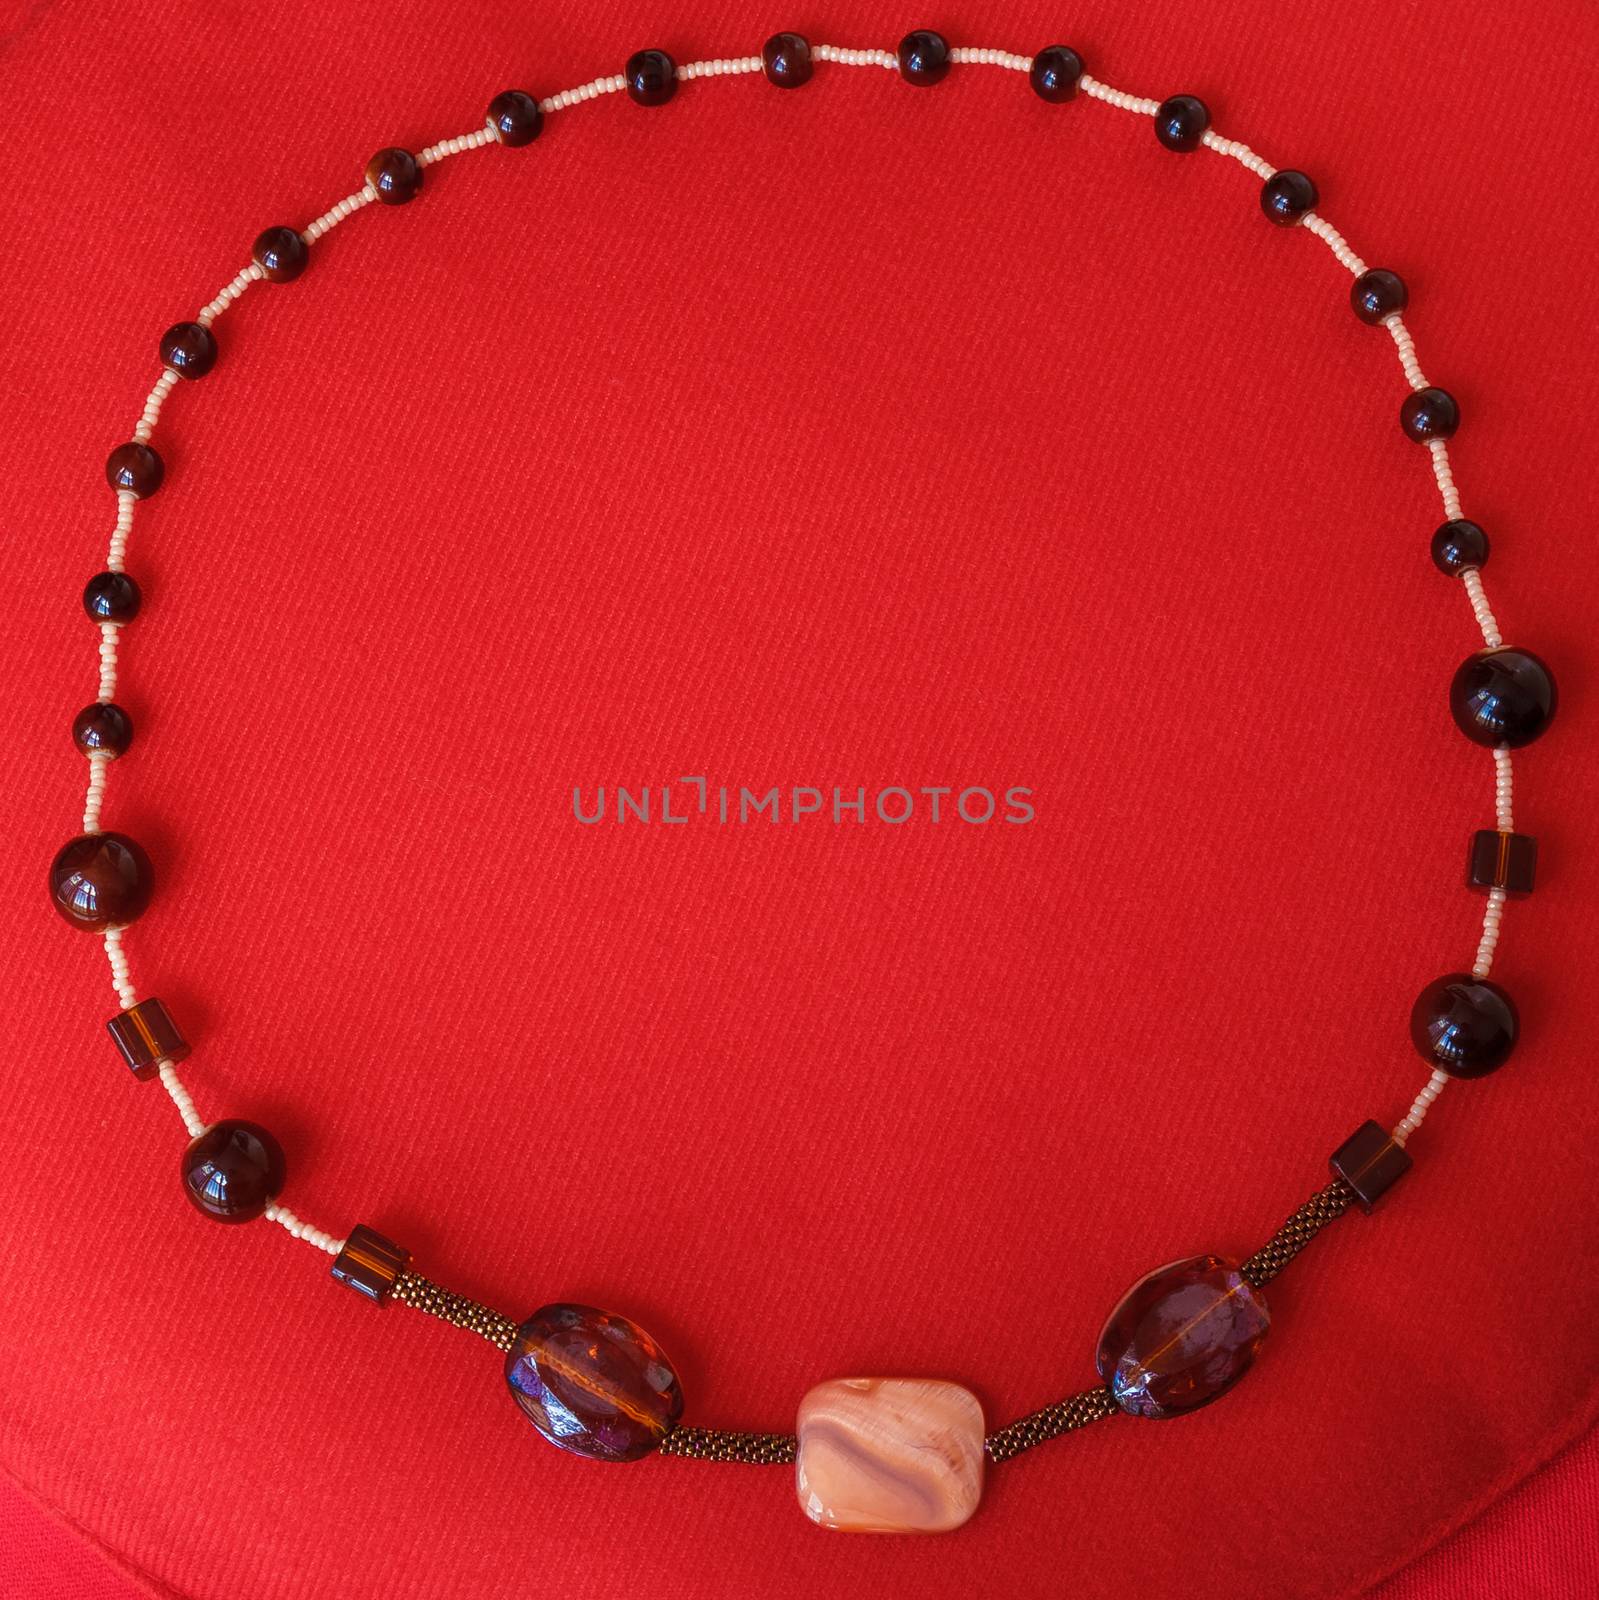 Beads necklace by a_mikos